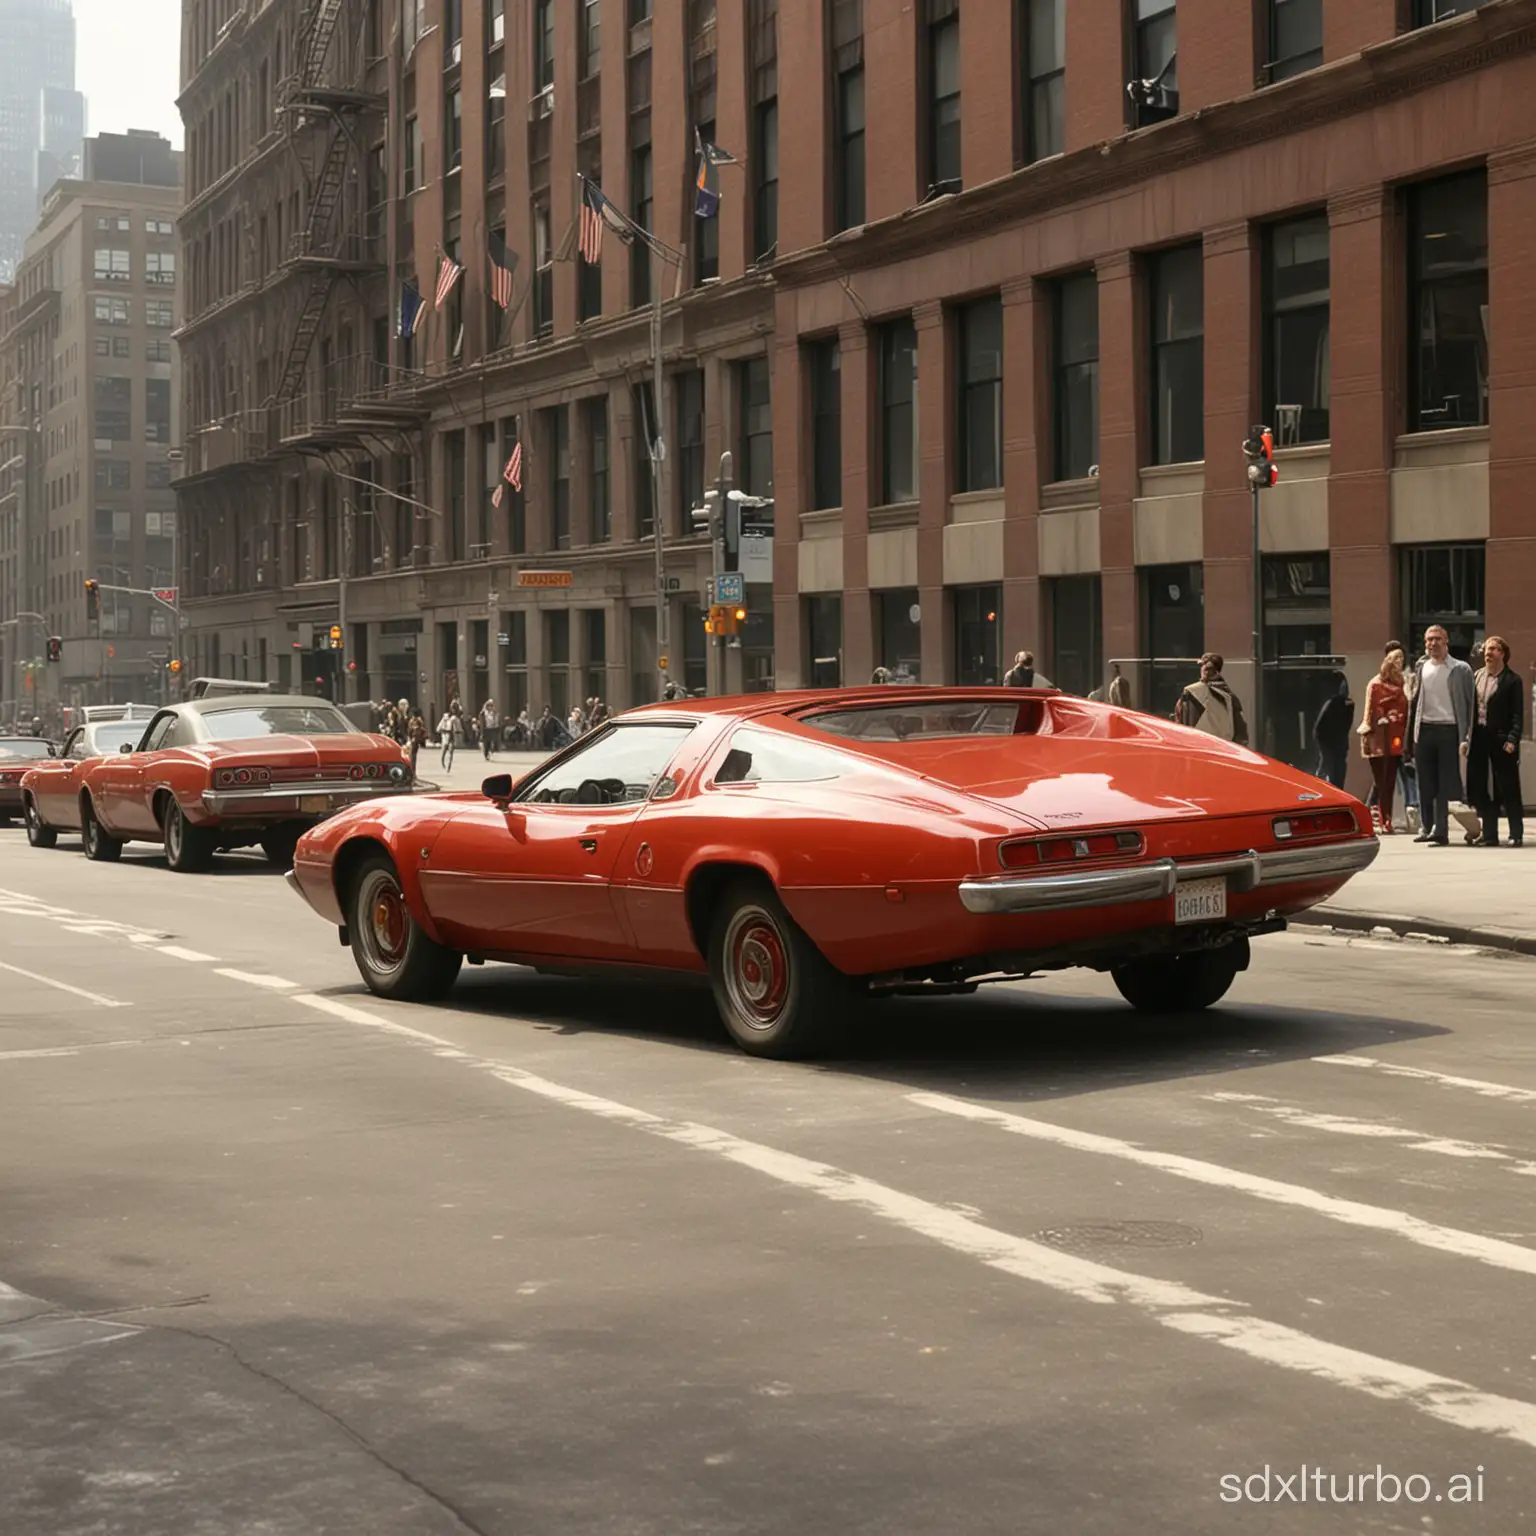 Red Car in the New York City (Production Date: June 2006 Production Companies: 20th Century Fox and Dune Entertainment)